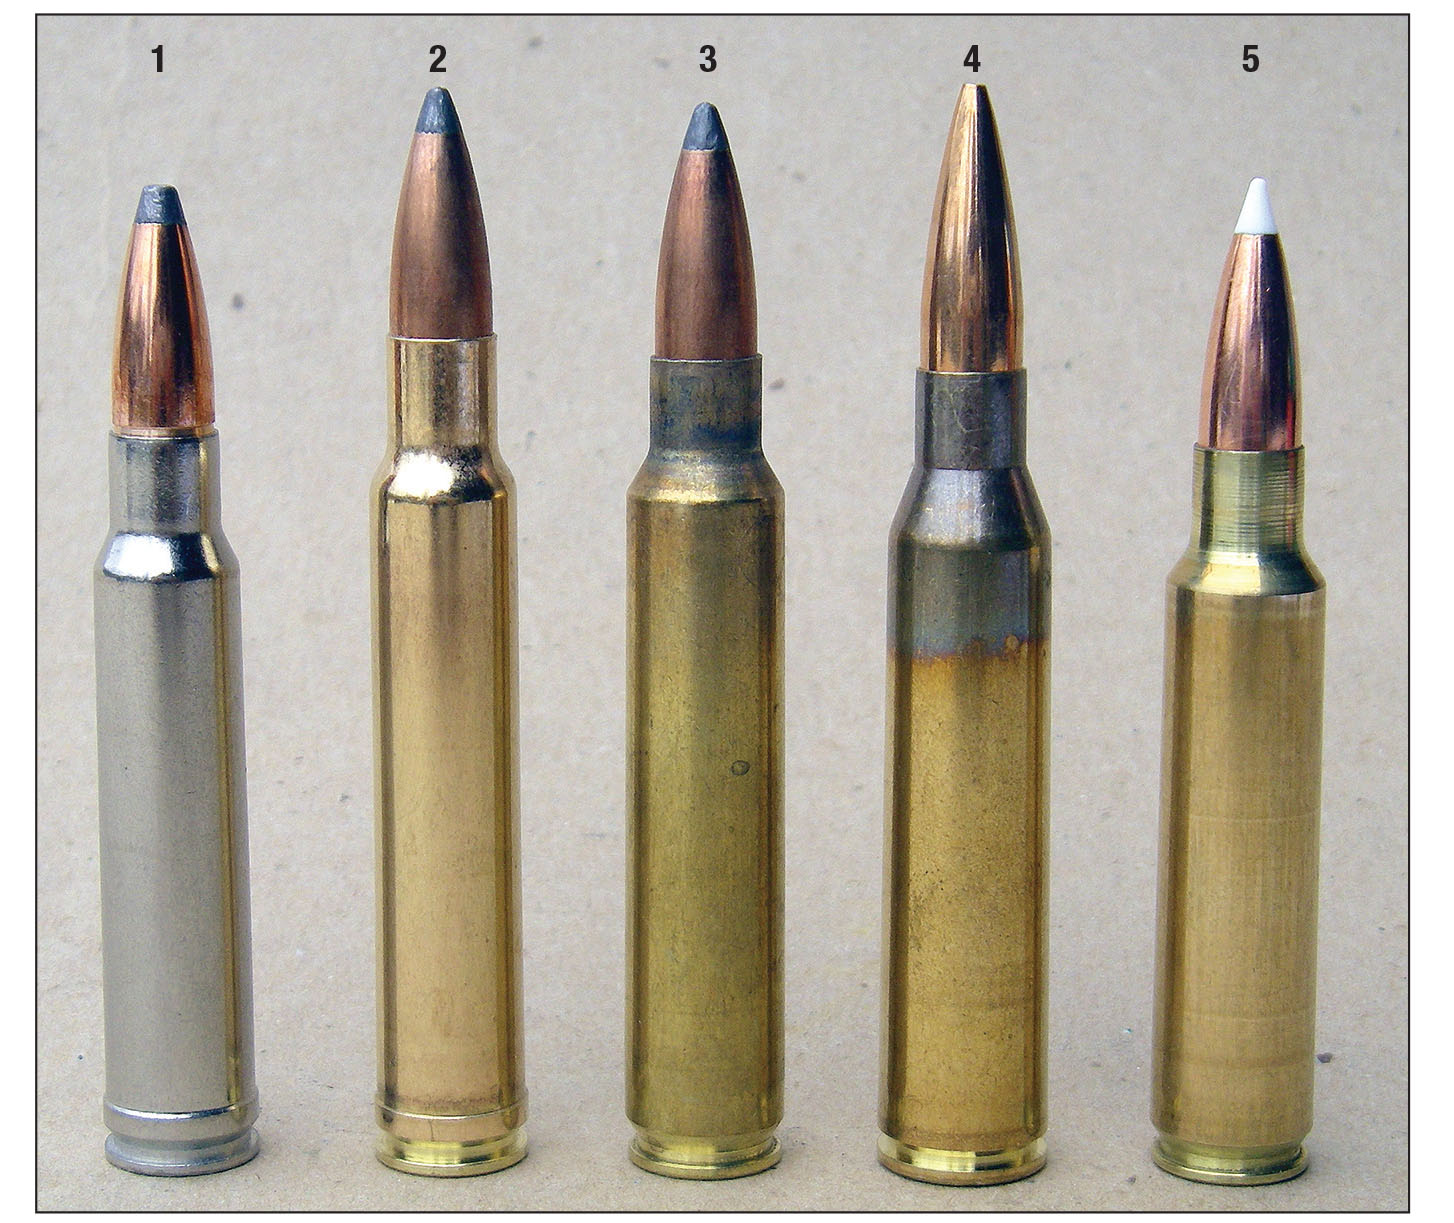 Big-game cartridges in .338 caliber have become popular, including the (1) .338 Winchester Magnum, (2) .340 Weatherby Magnum, (3) .338 Remington Ultra Mag, (4) .338 Lapua and (5) .33 Nosler.